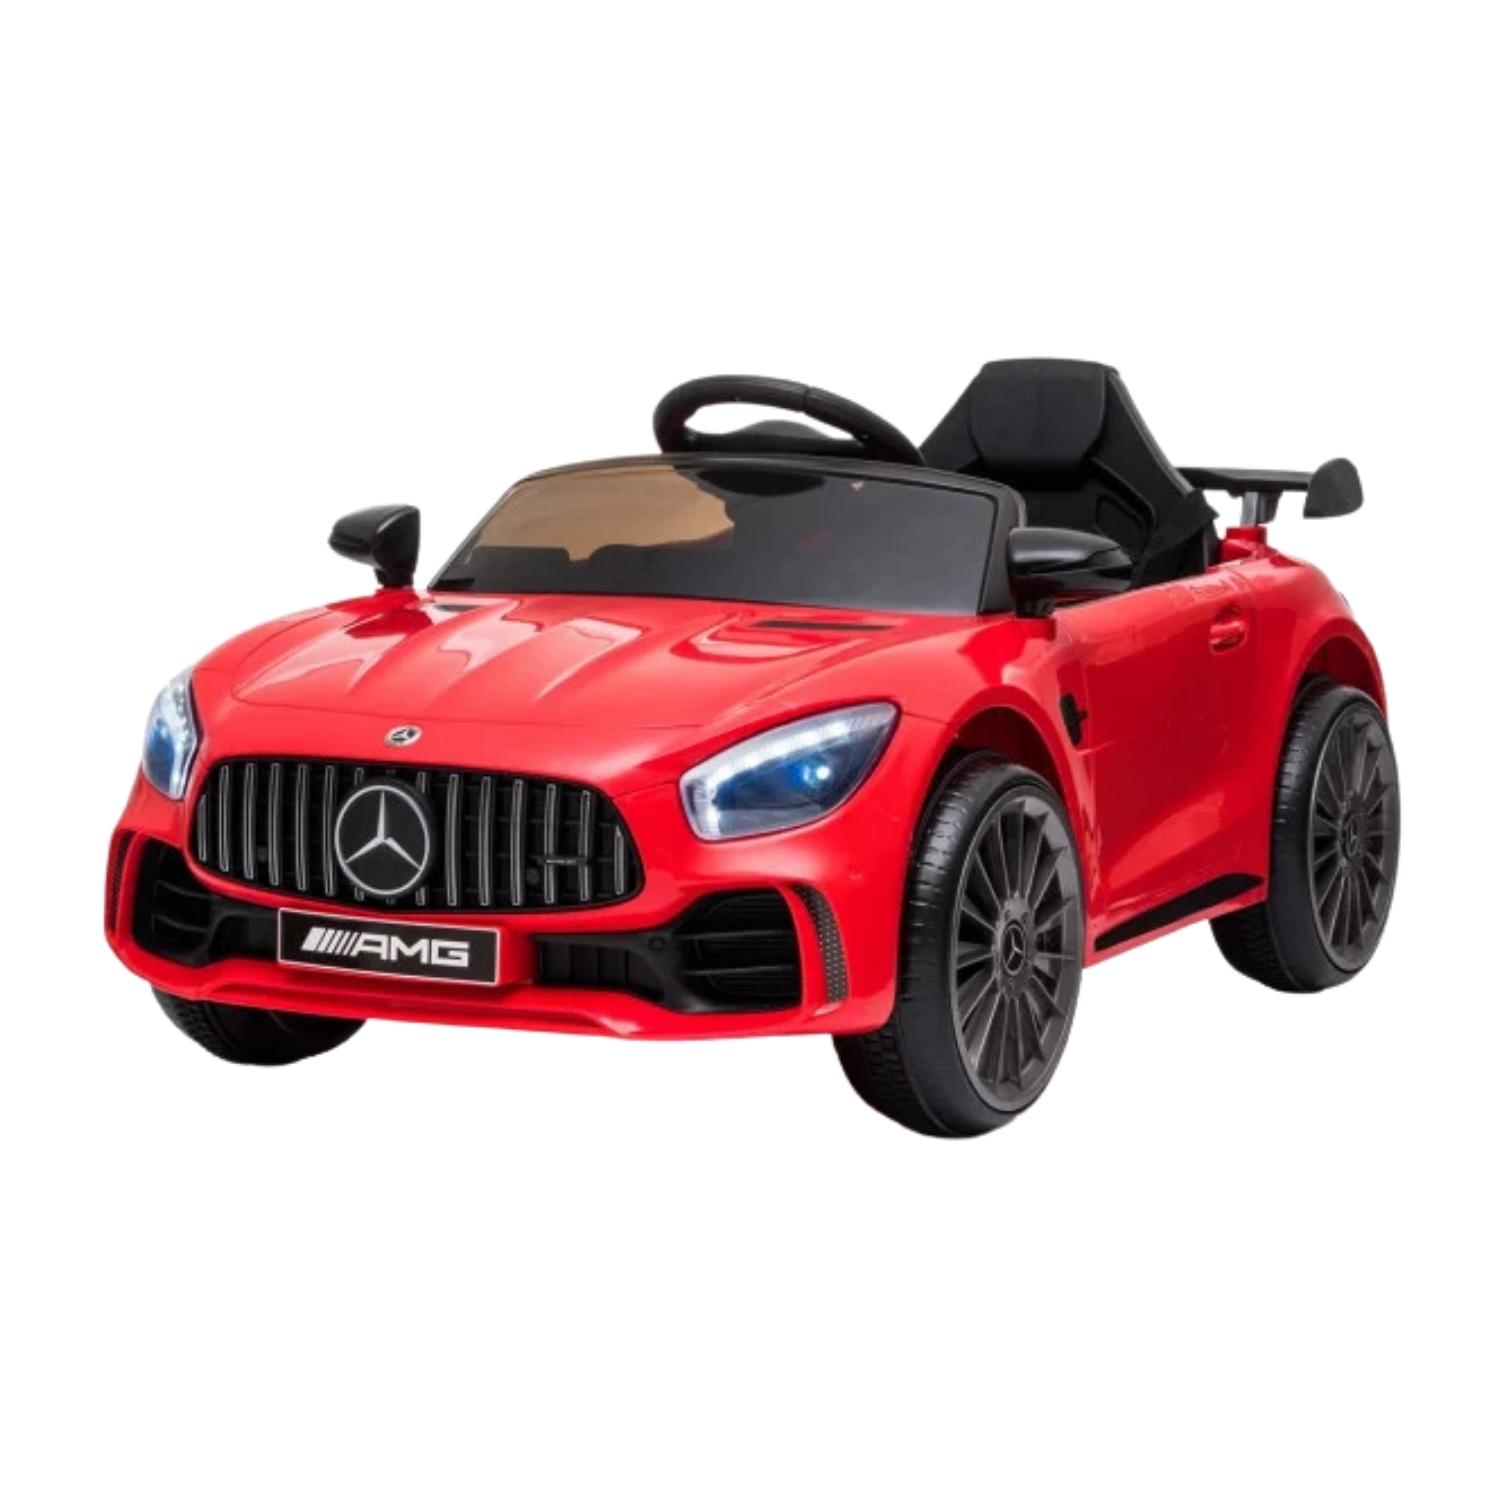 Mercedes Benz Licensed Kids Electric Ride On Car Remote Control Red 1